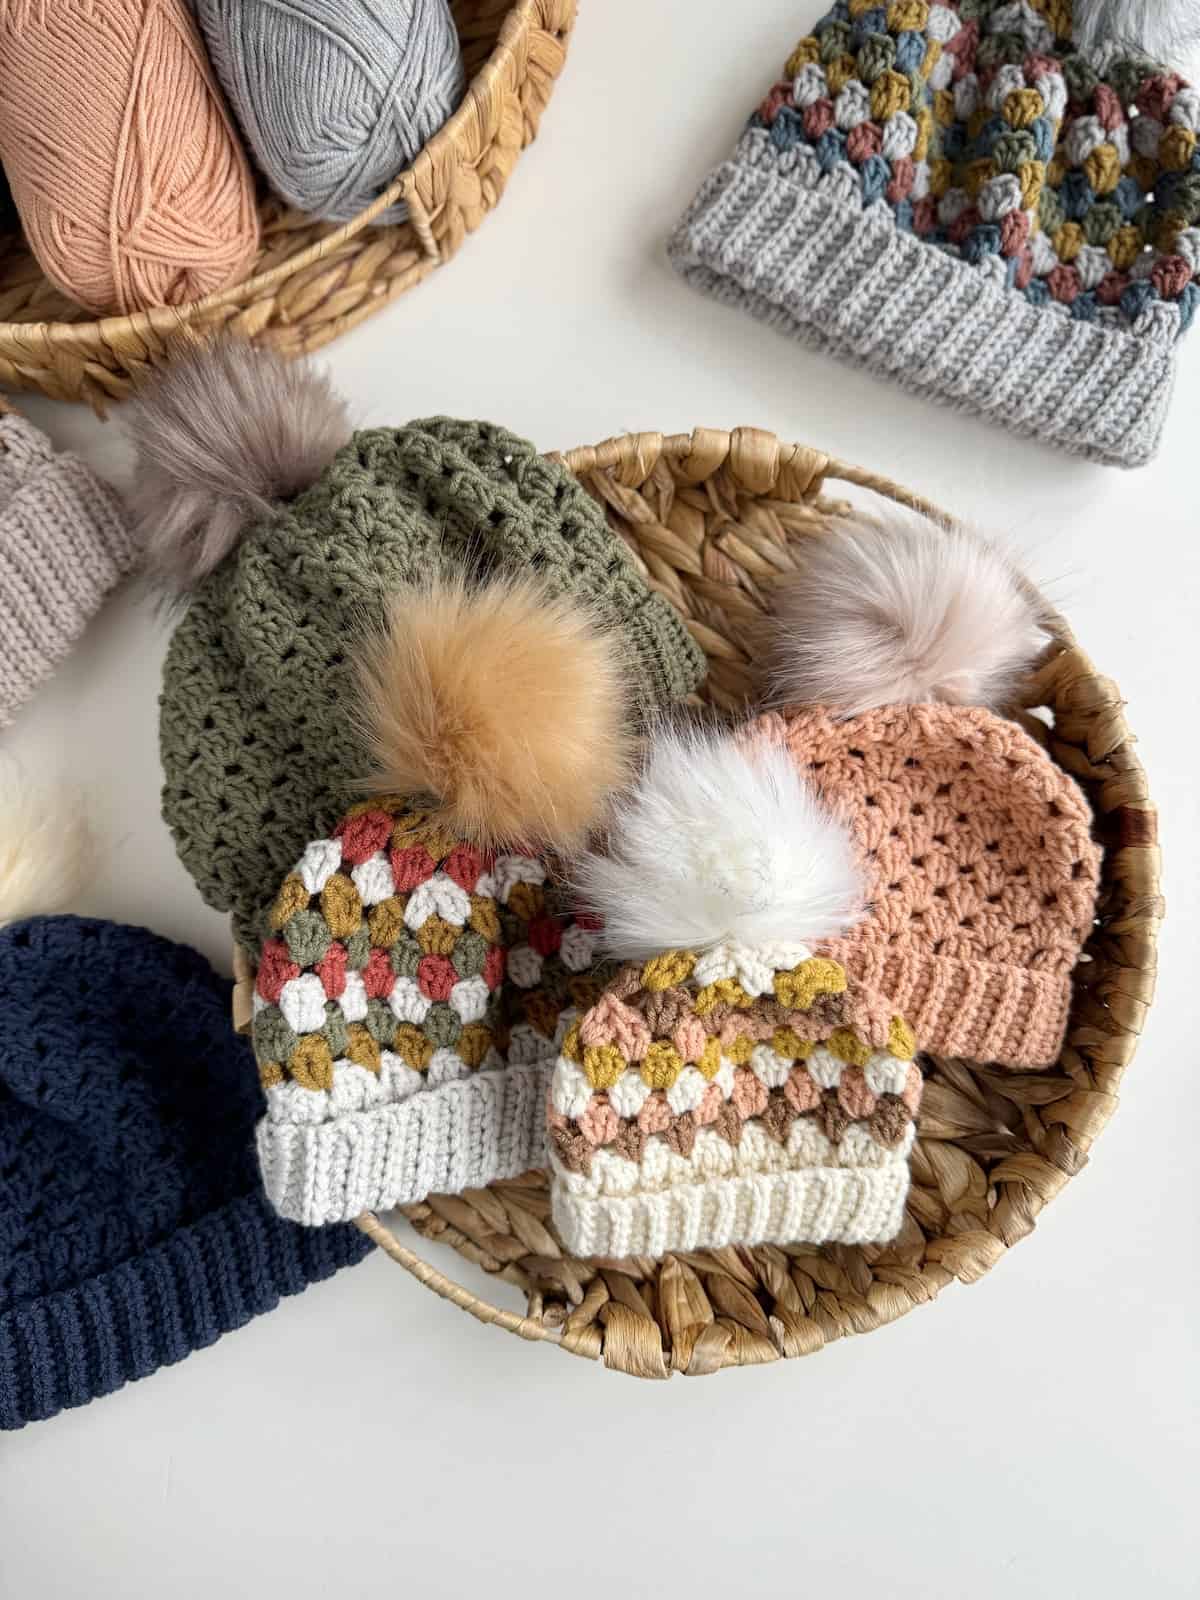 Crocheted hats with pom poms in a basket.